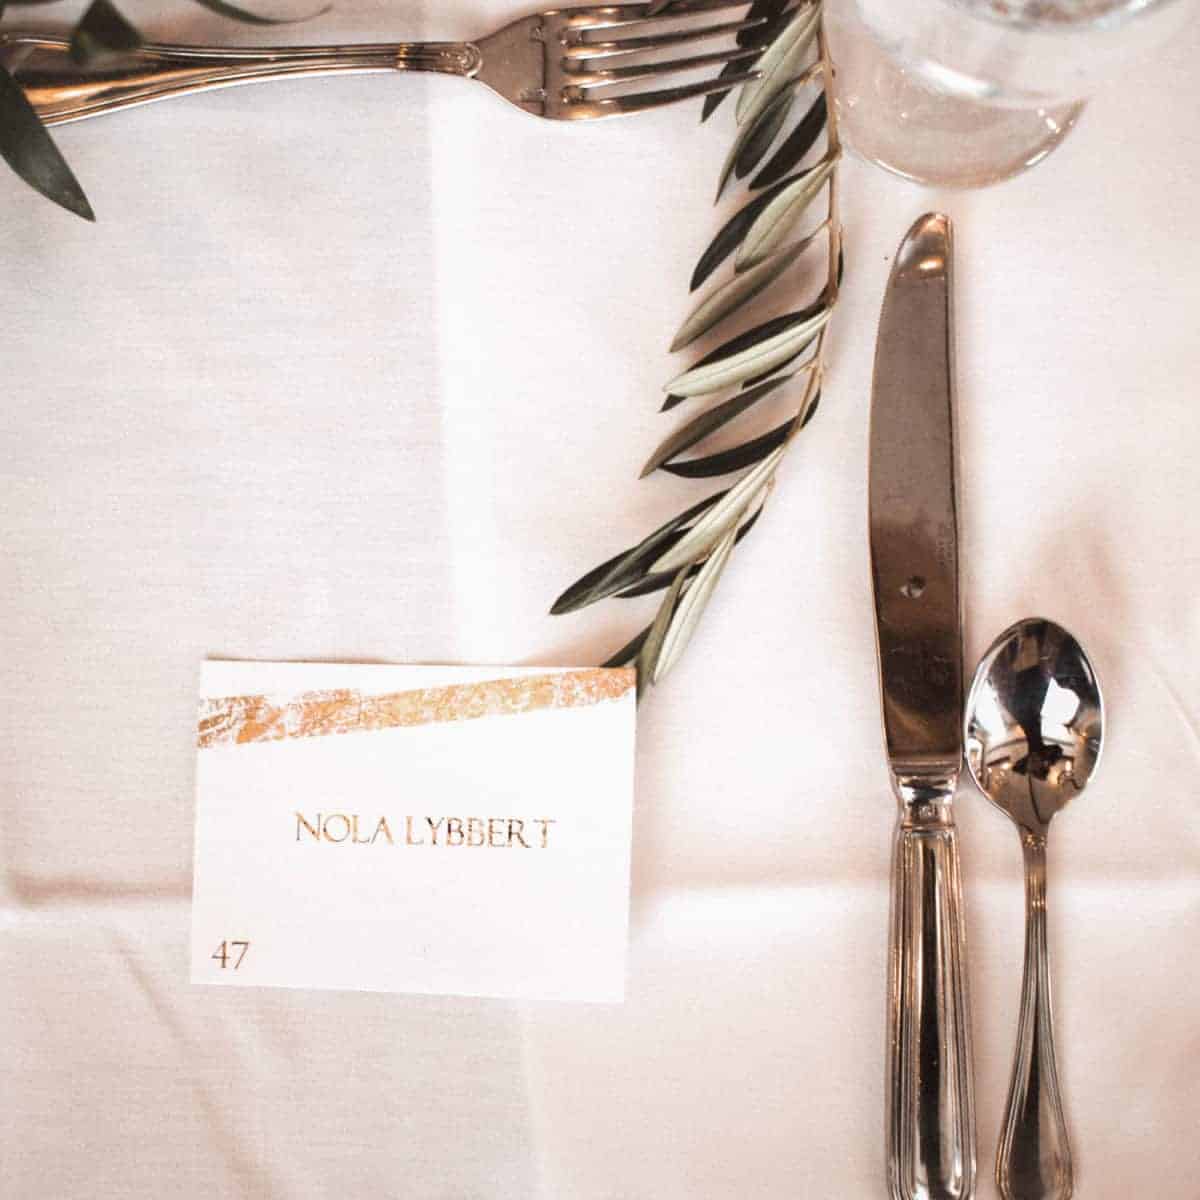 Add a touch of gold to your wedding lunch or dinner with these name cards. Save some money with some simple DIY wedding elements like this.